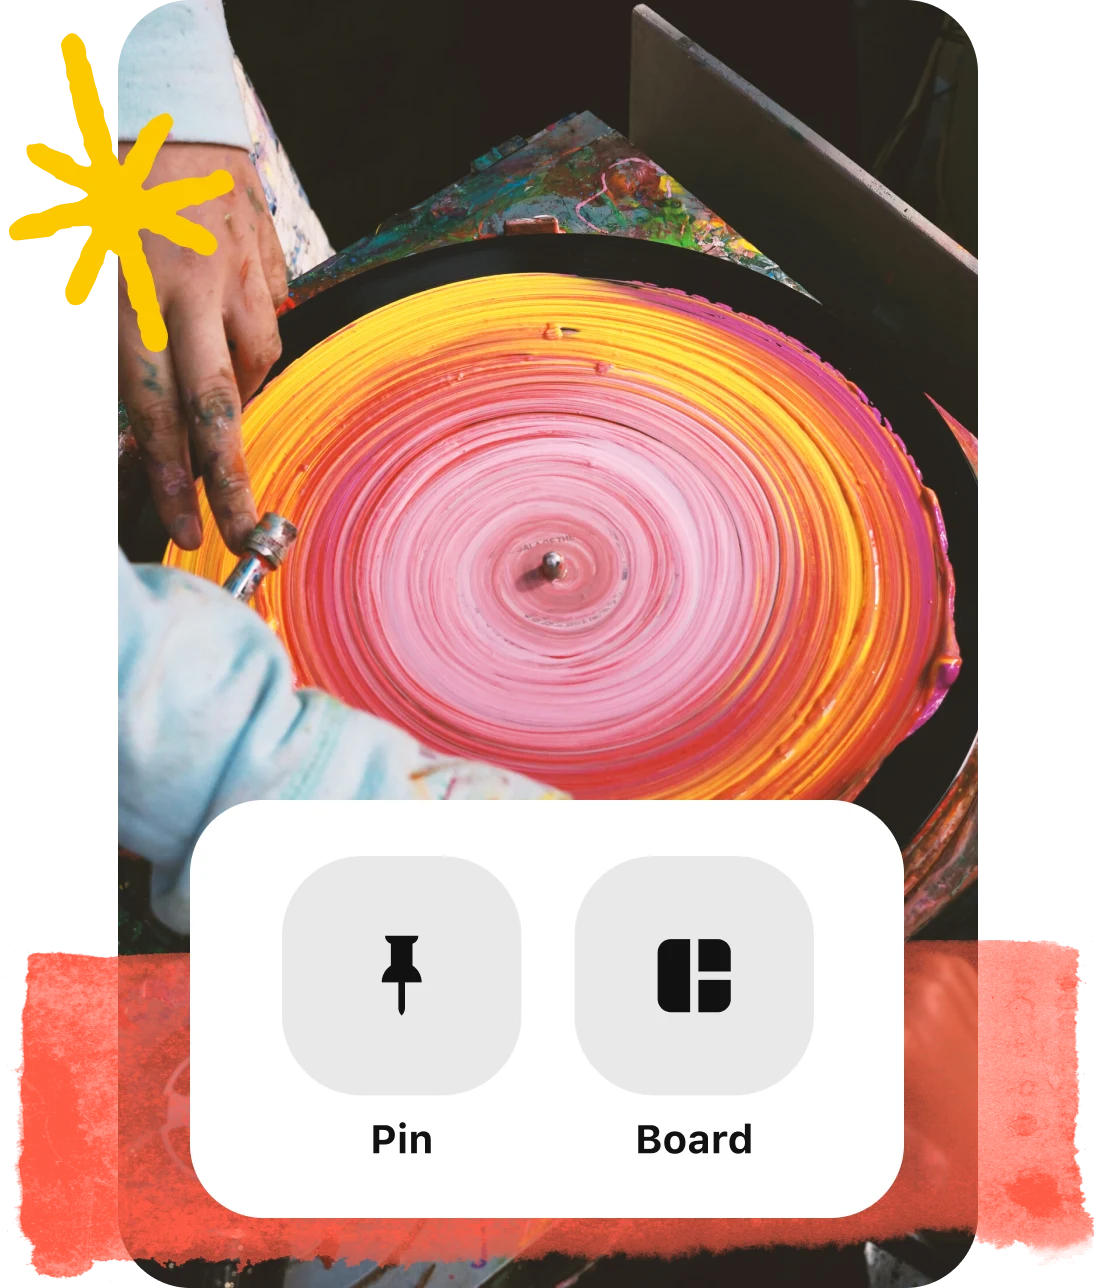 Collage of Pin format buttons and an image of hands spinning a painted record